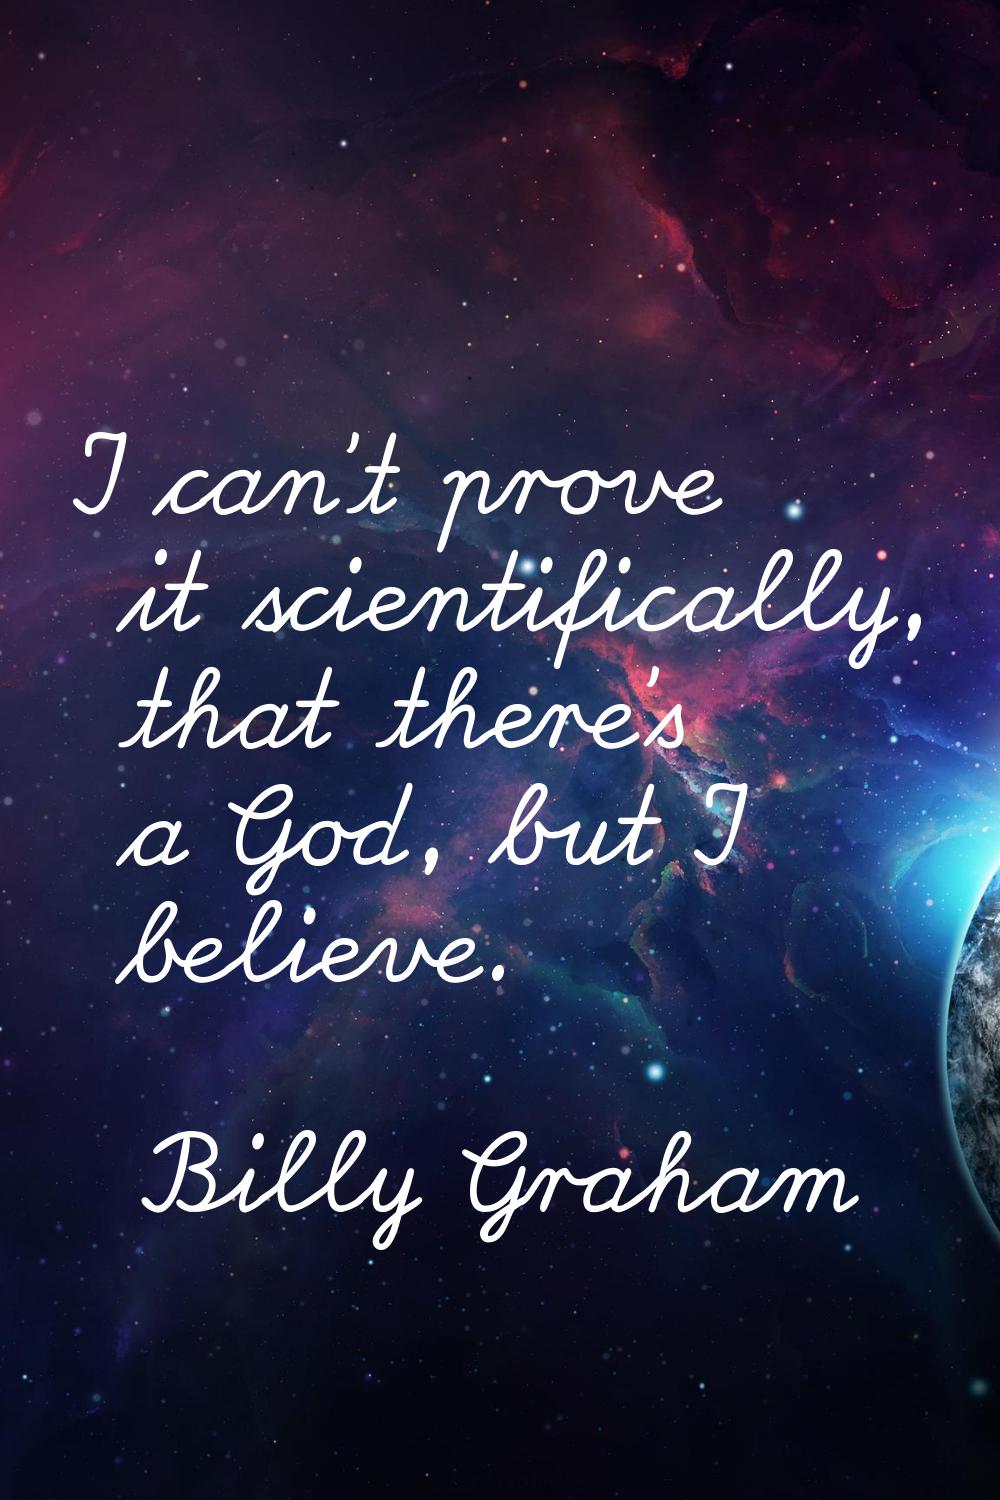 I can't prove it scientifically, that there's a God, but I believe.